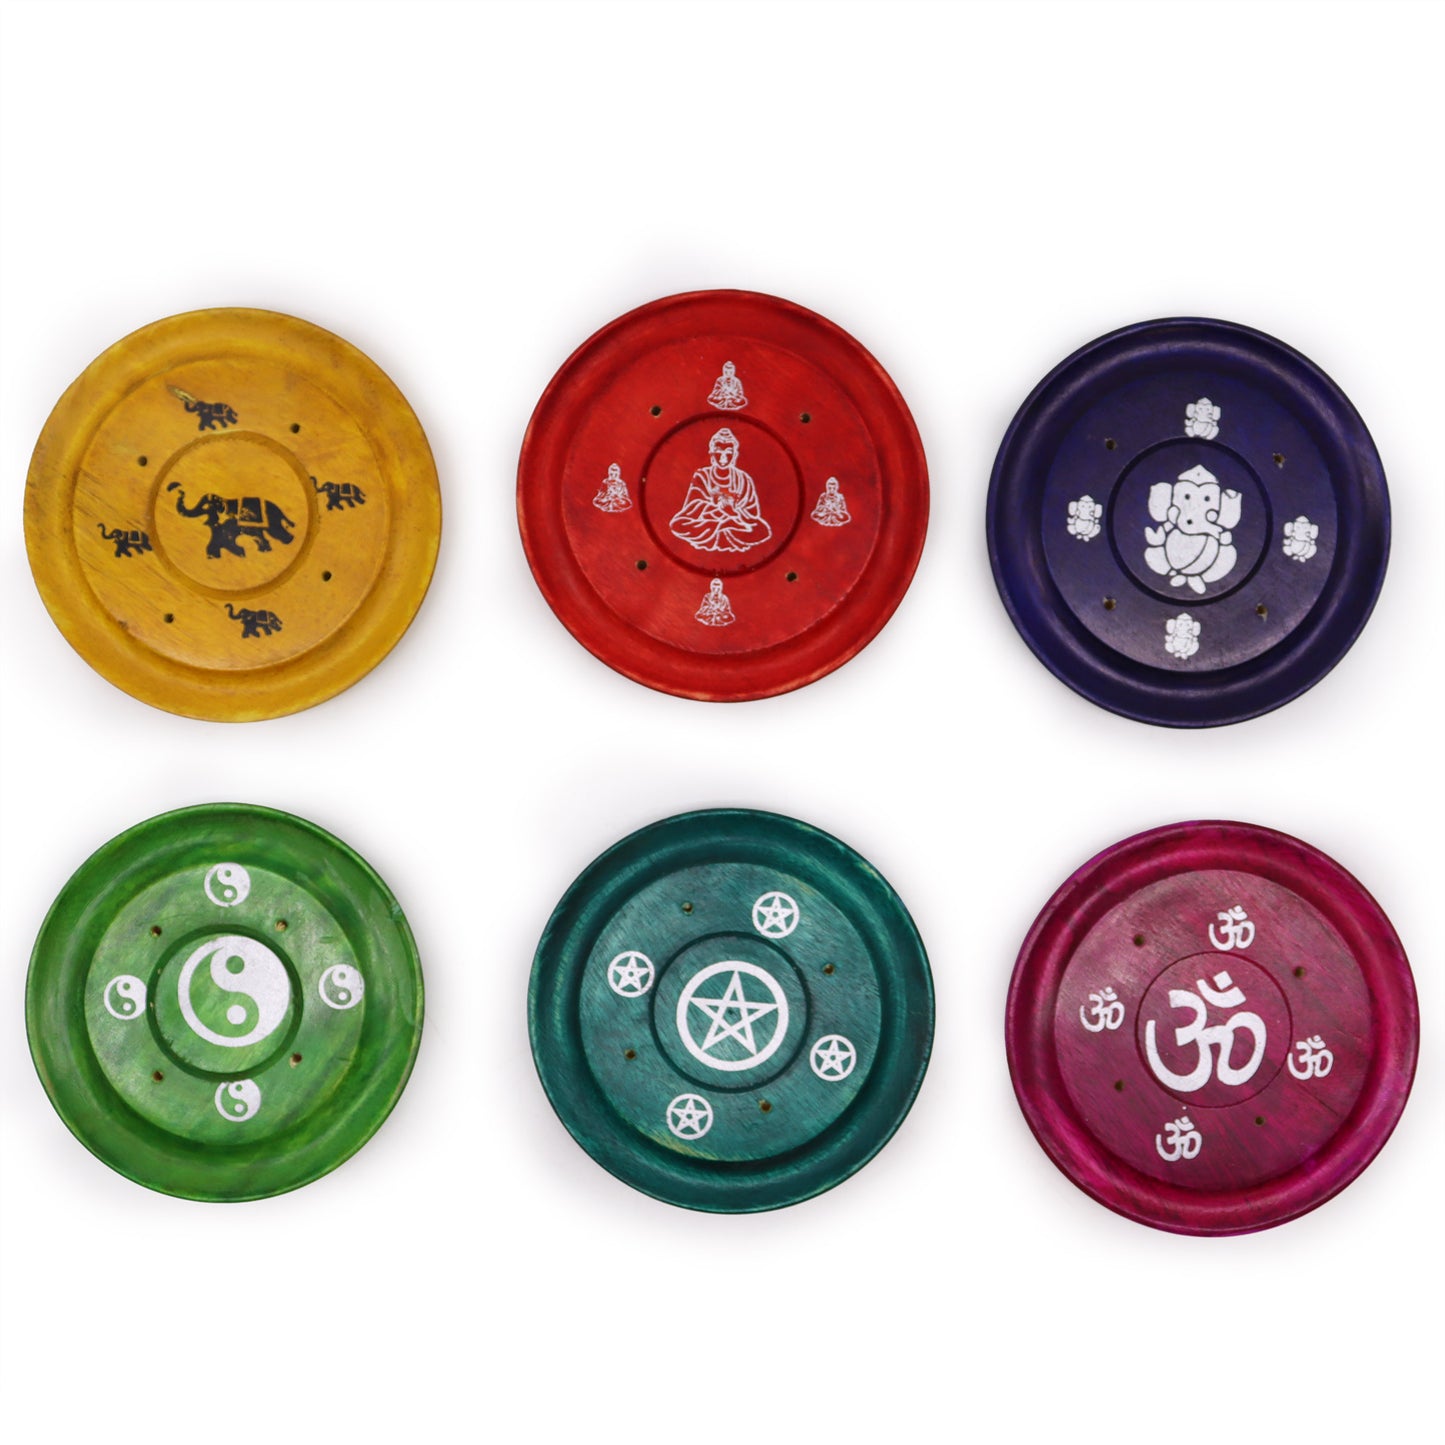 Incense Plates - Assorted Designs - Cosmic Serenity Shop